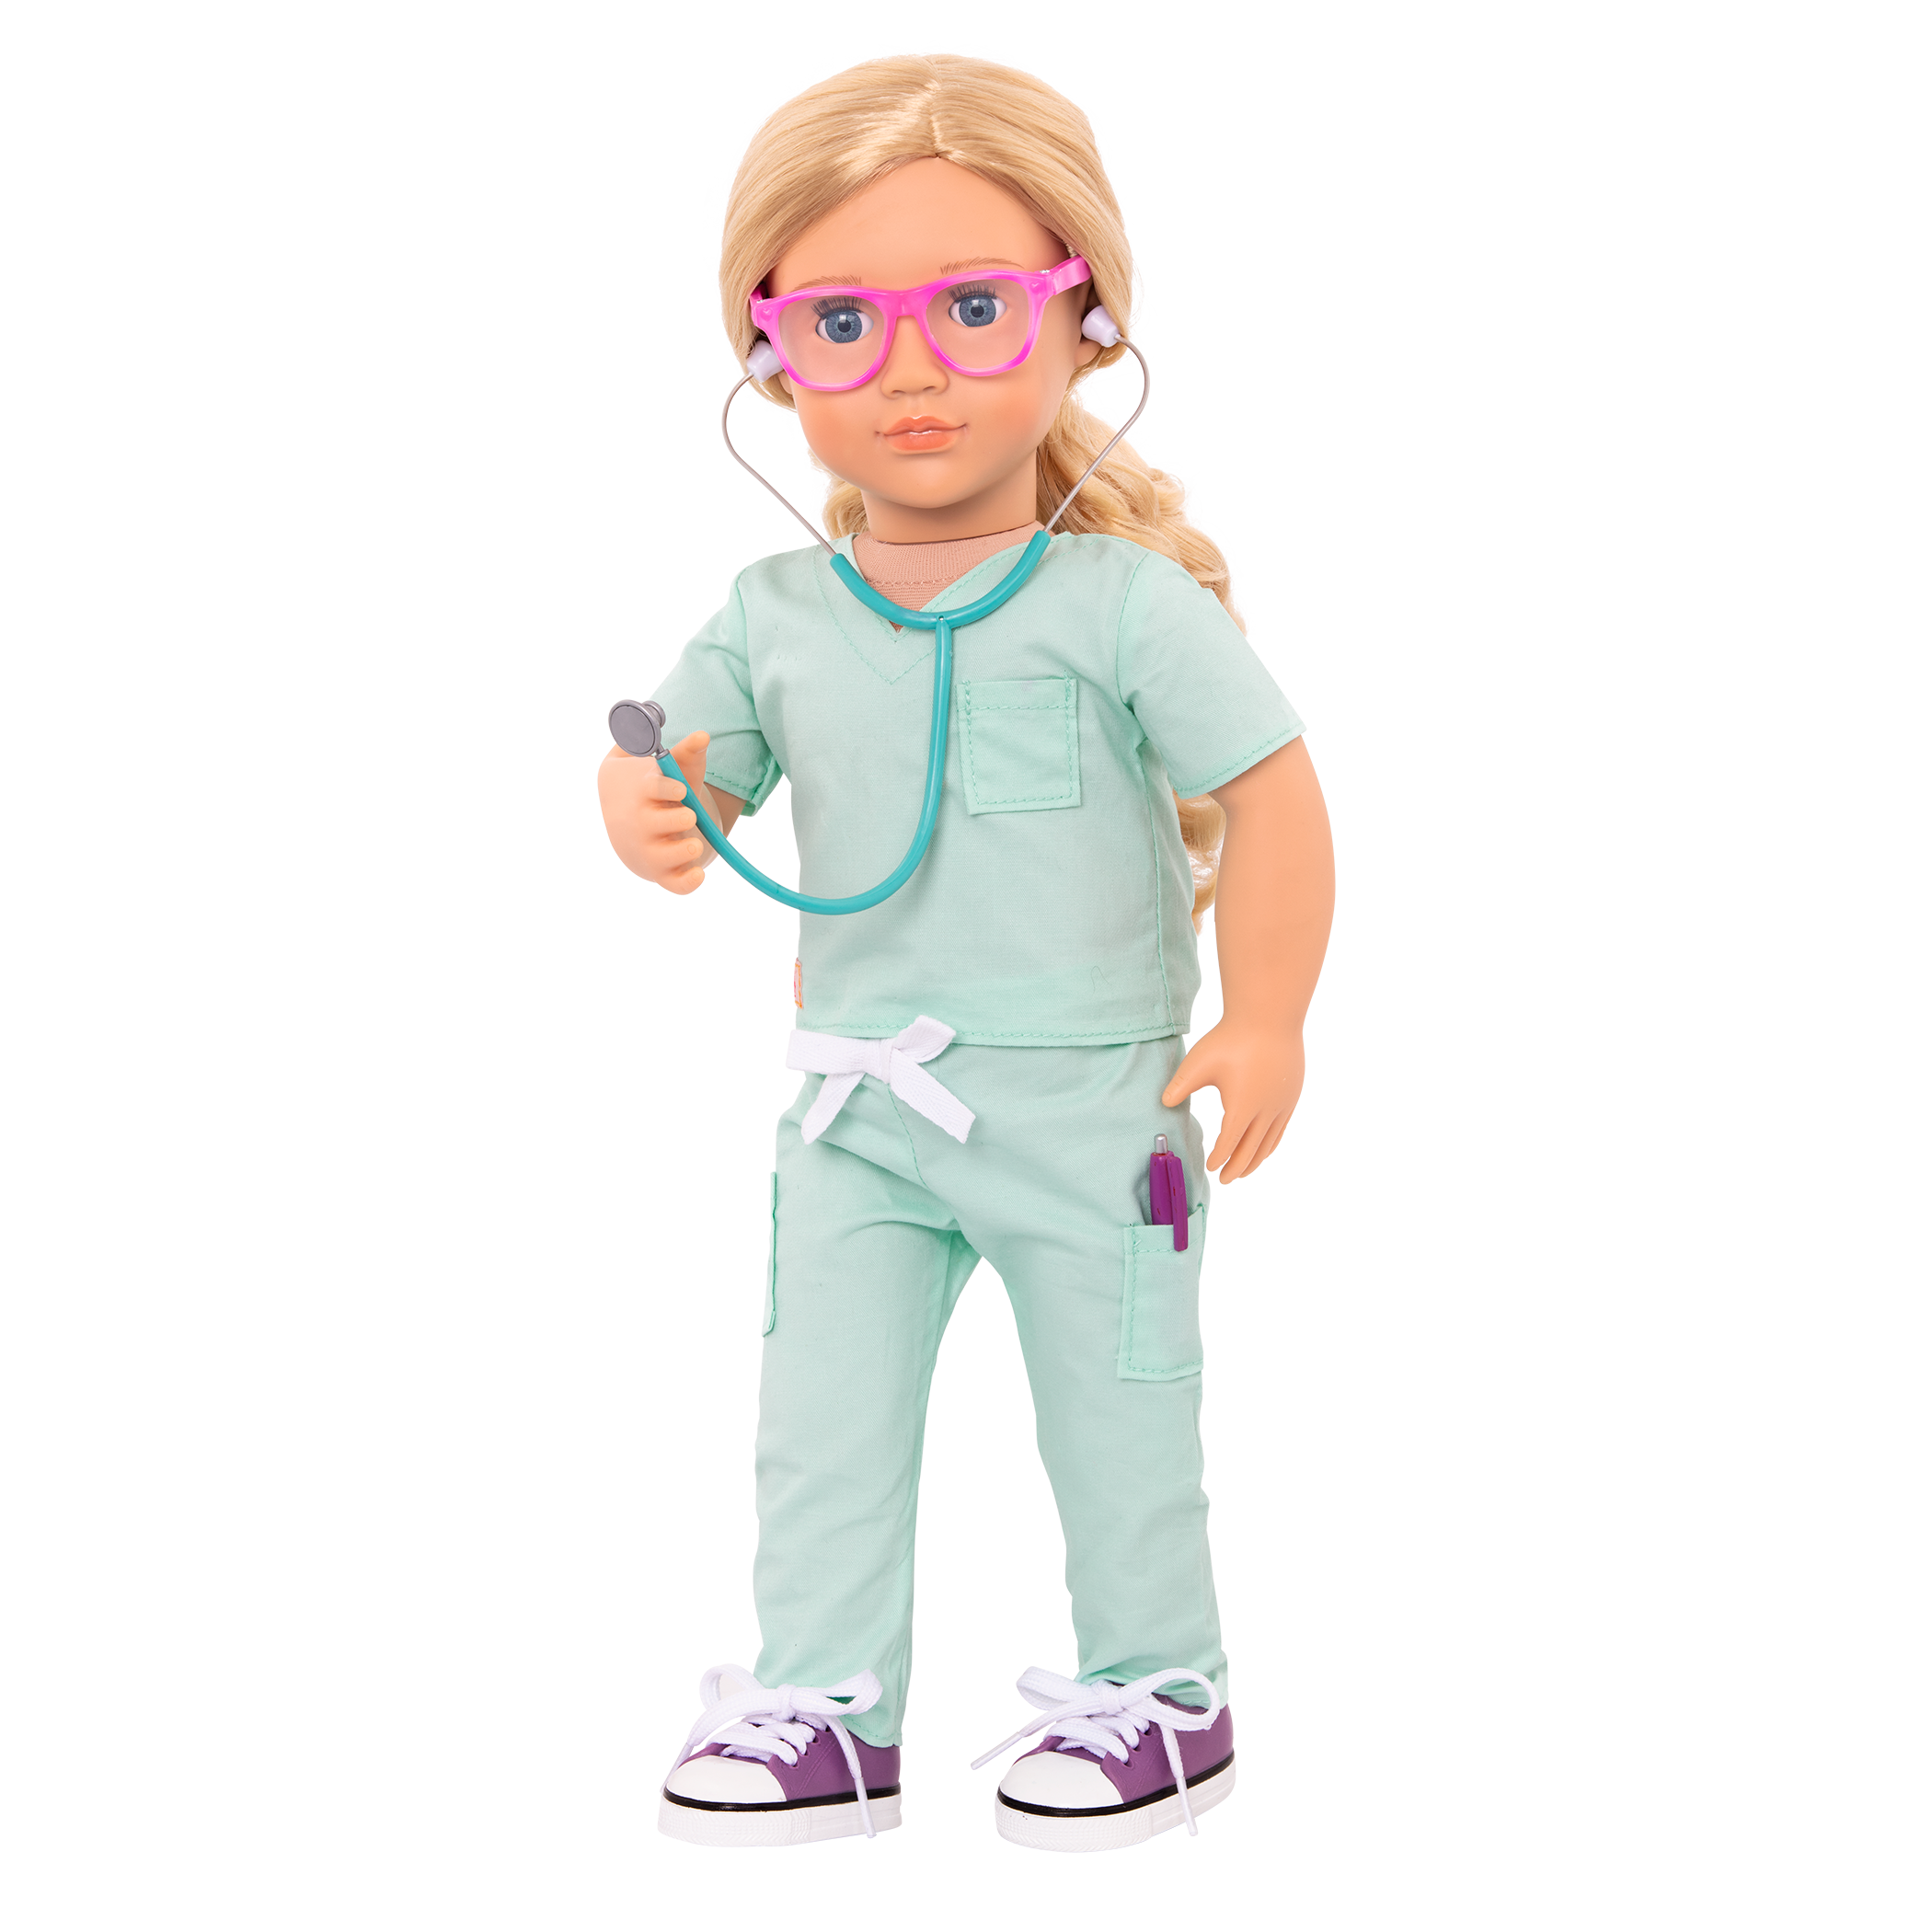 Surgeon scrubs and accessories for 18-inch doll